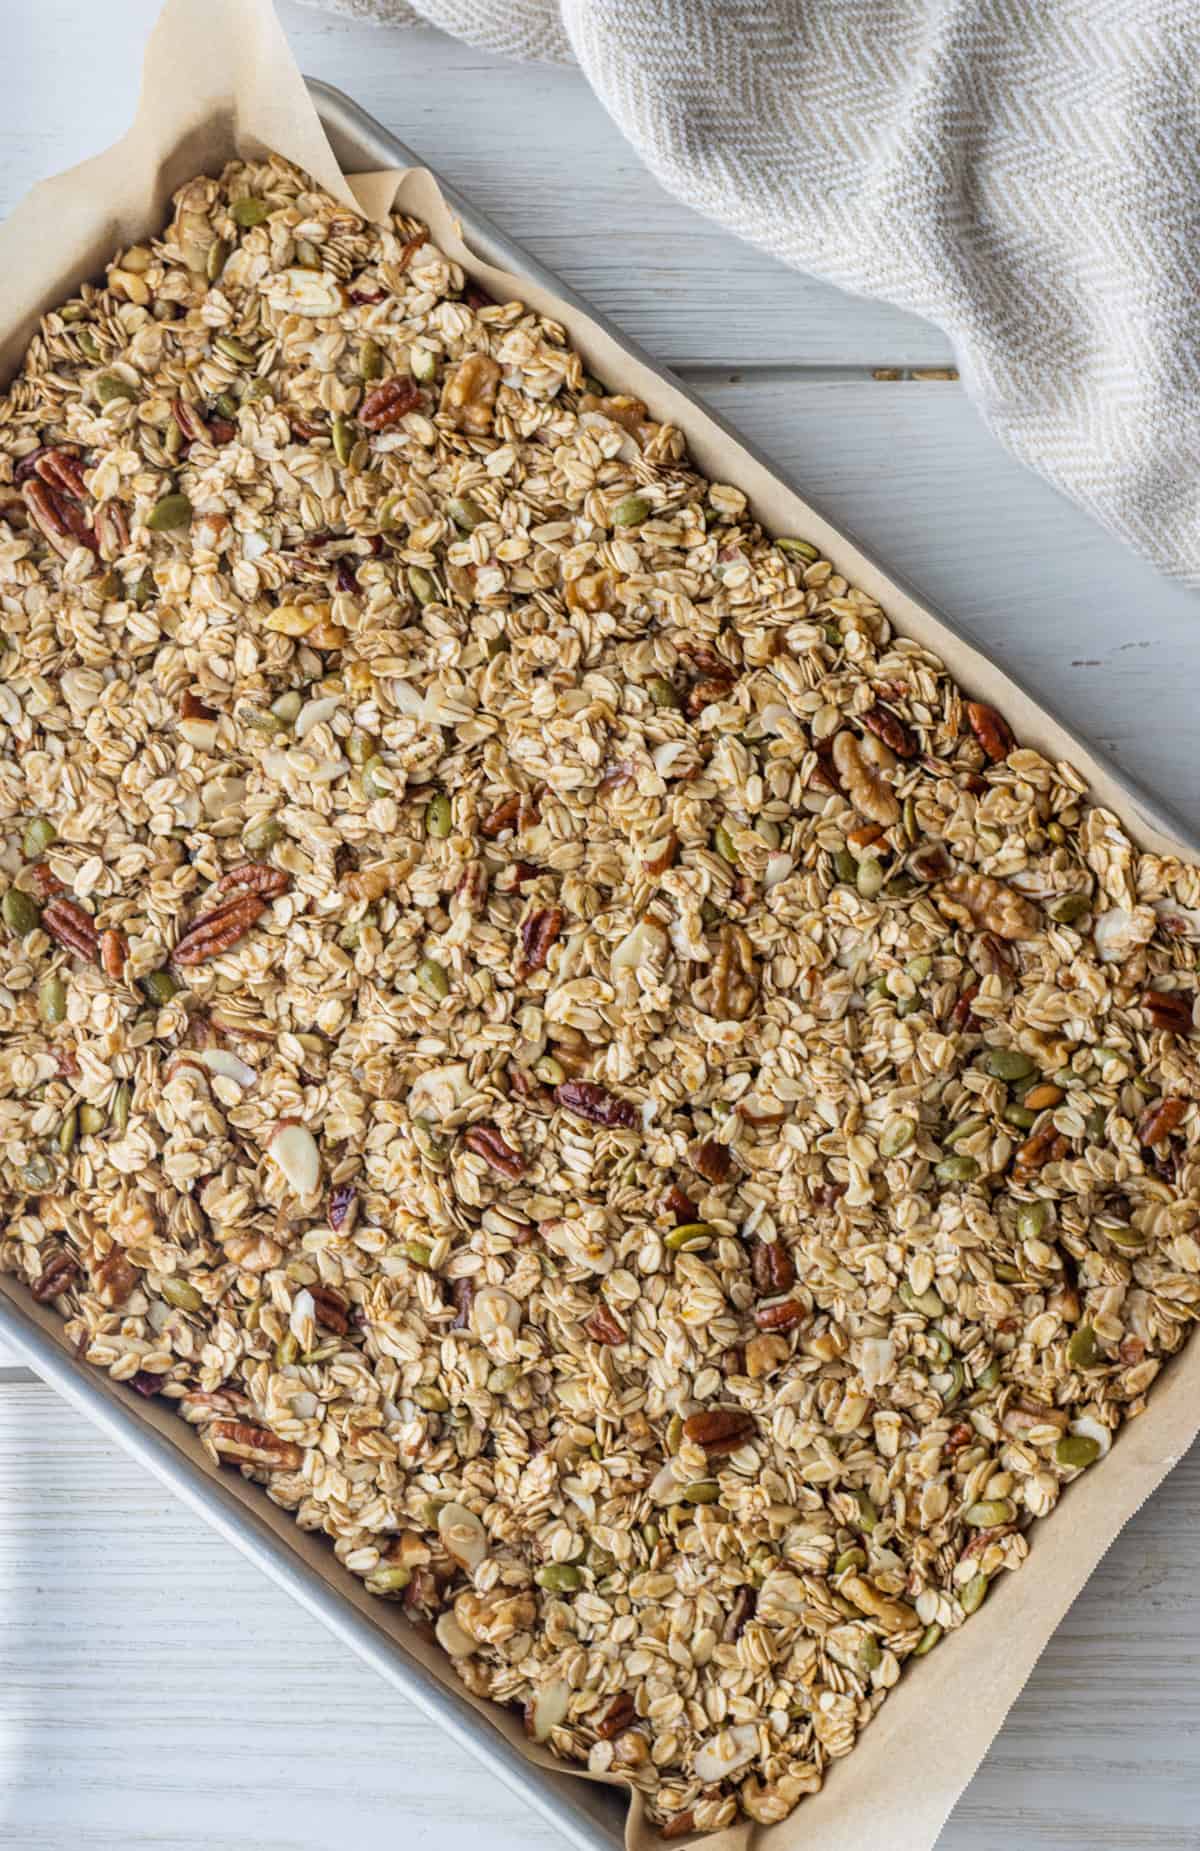 Baked granola on a parchment paper-lined baking sheet.